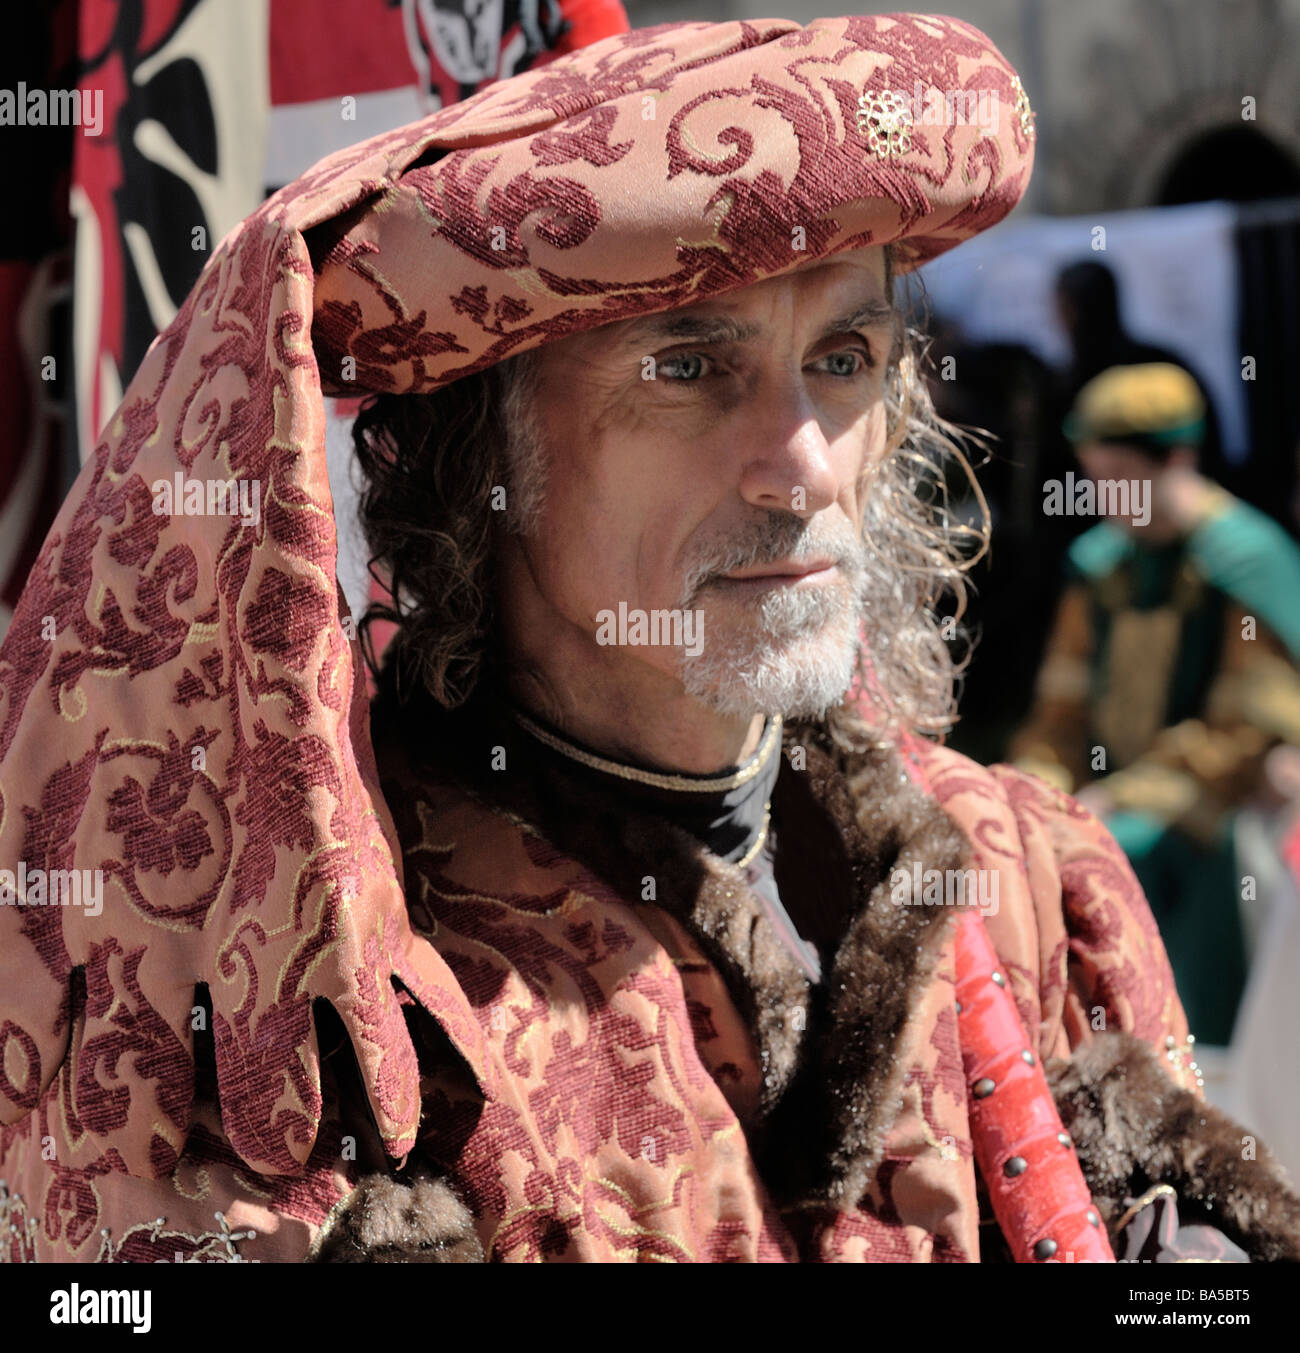 Montepulciano, Tuscany, Italy. Man in Mediaeval pageant costume during annual wine festival known as the Bravio delle Botti Stock Photo